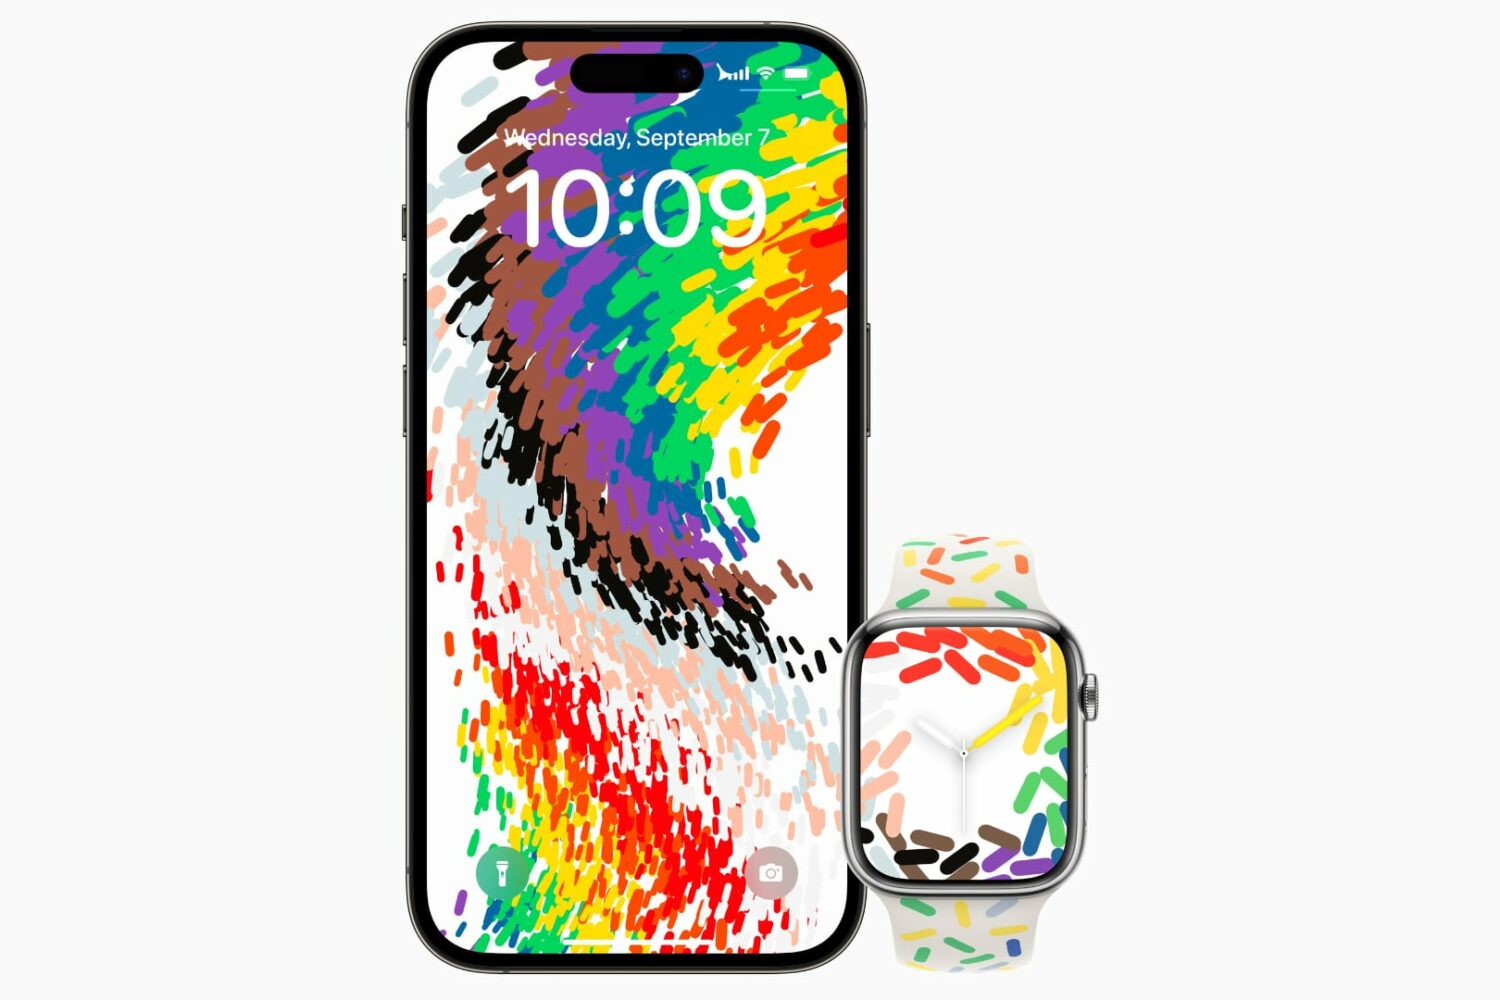 Pride Edition 2023 wallpaper on Apple Watch and iPhone